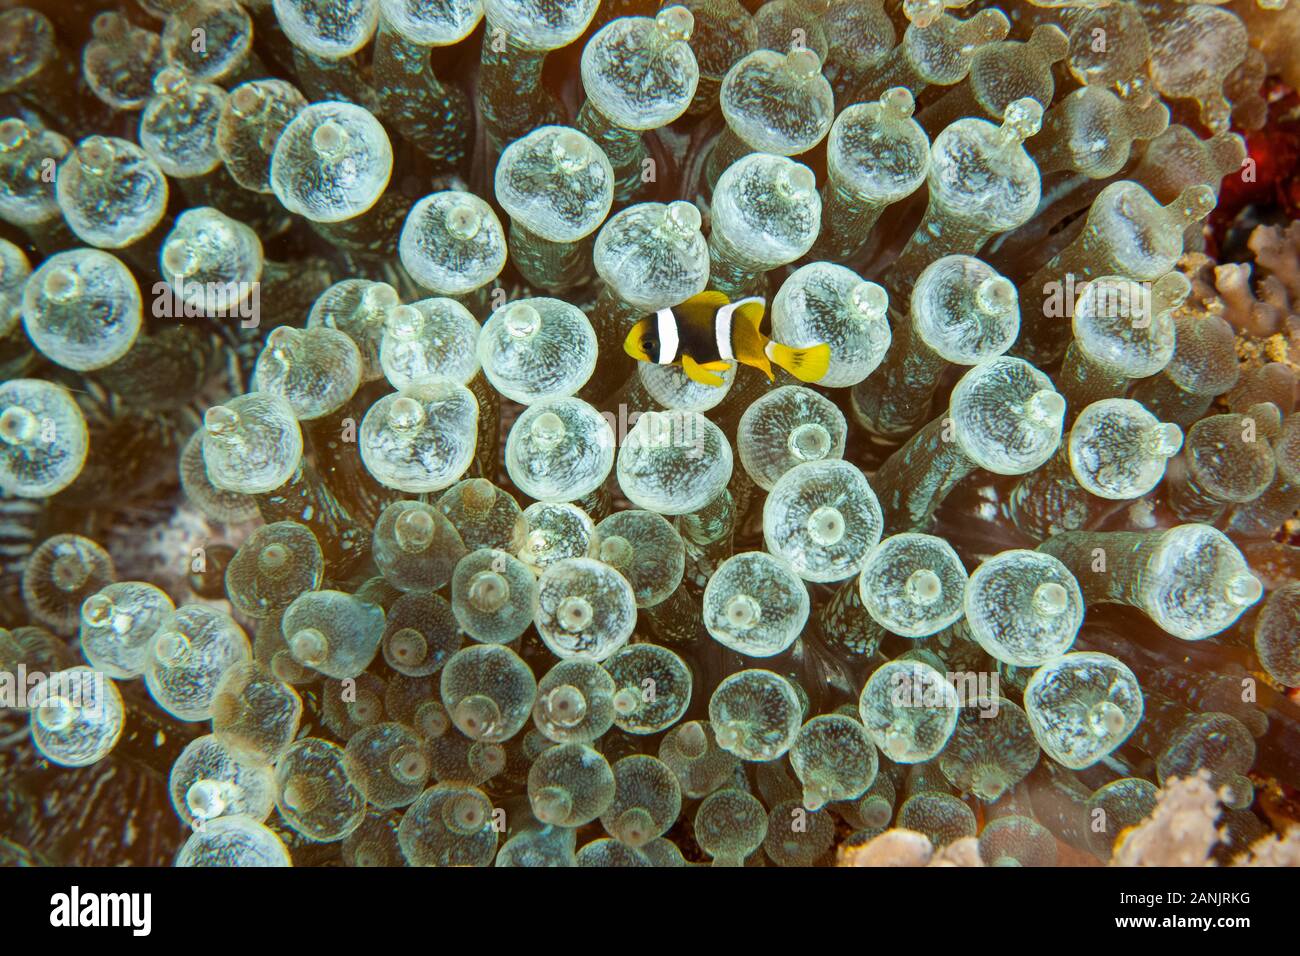 young sebae clownfish, or yellow-tail anemonefish, Amphiprion sebae, among bulb tentacles of bubble-tip sea anemone, Entacmaea quadricolor, Maldives, Stock Photo